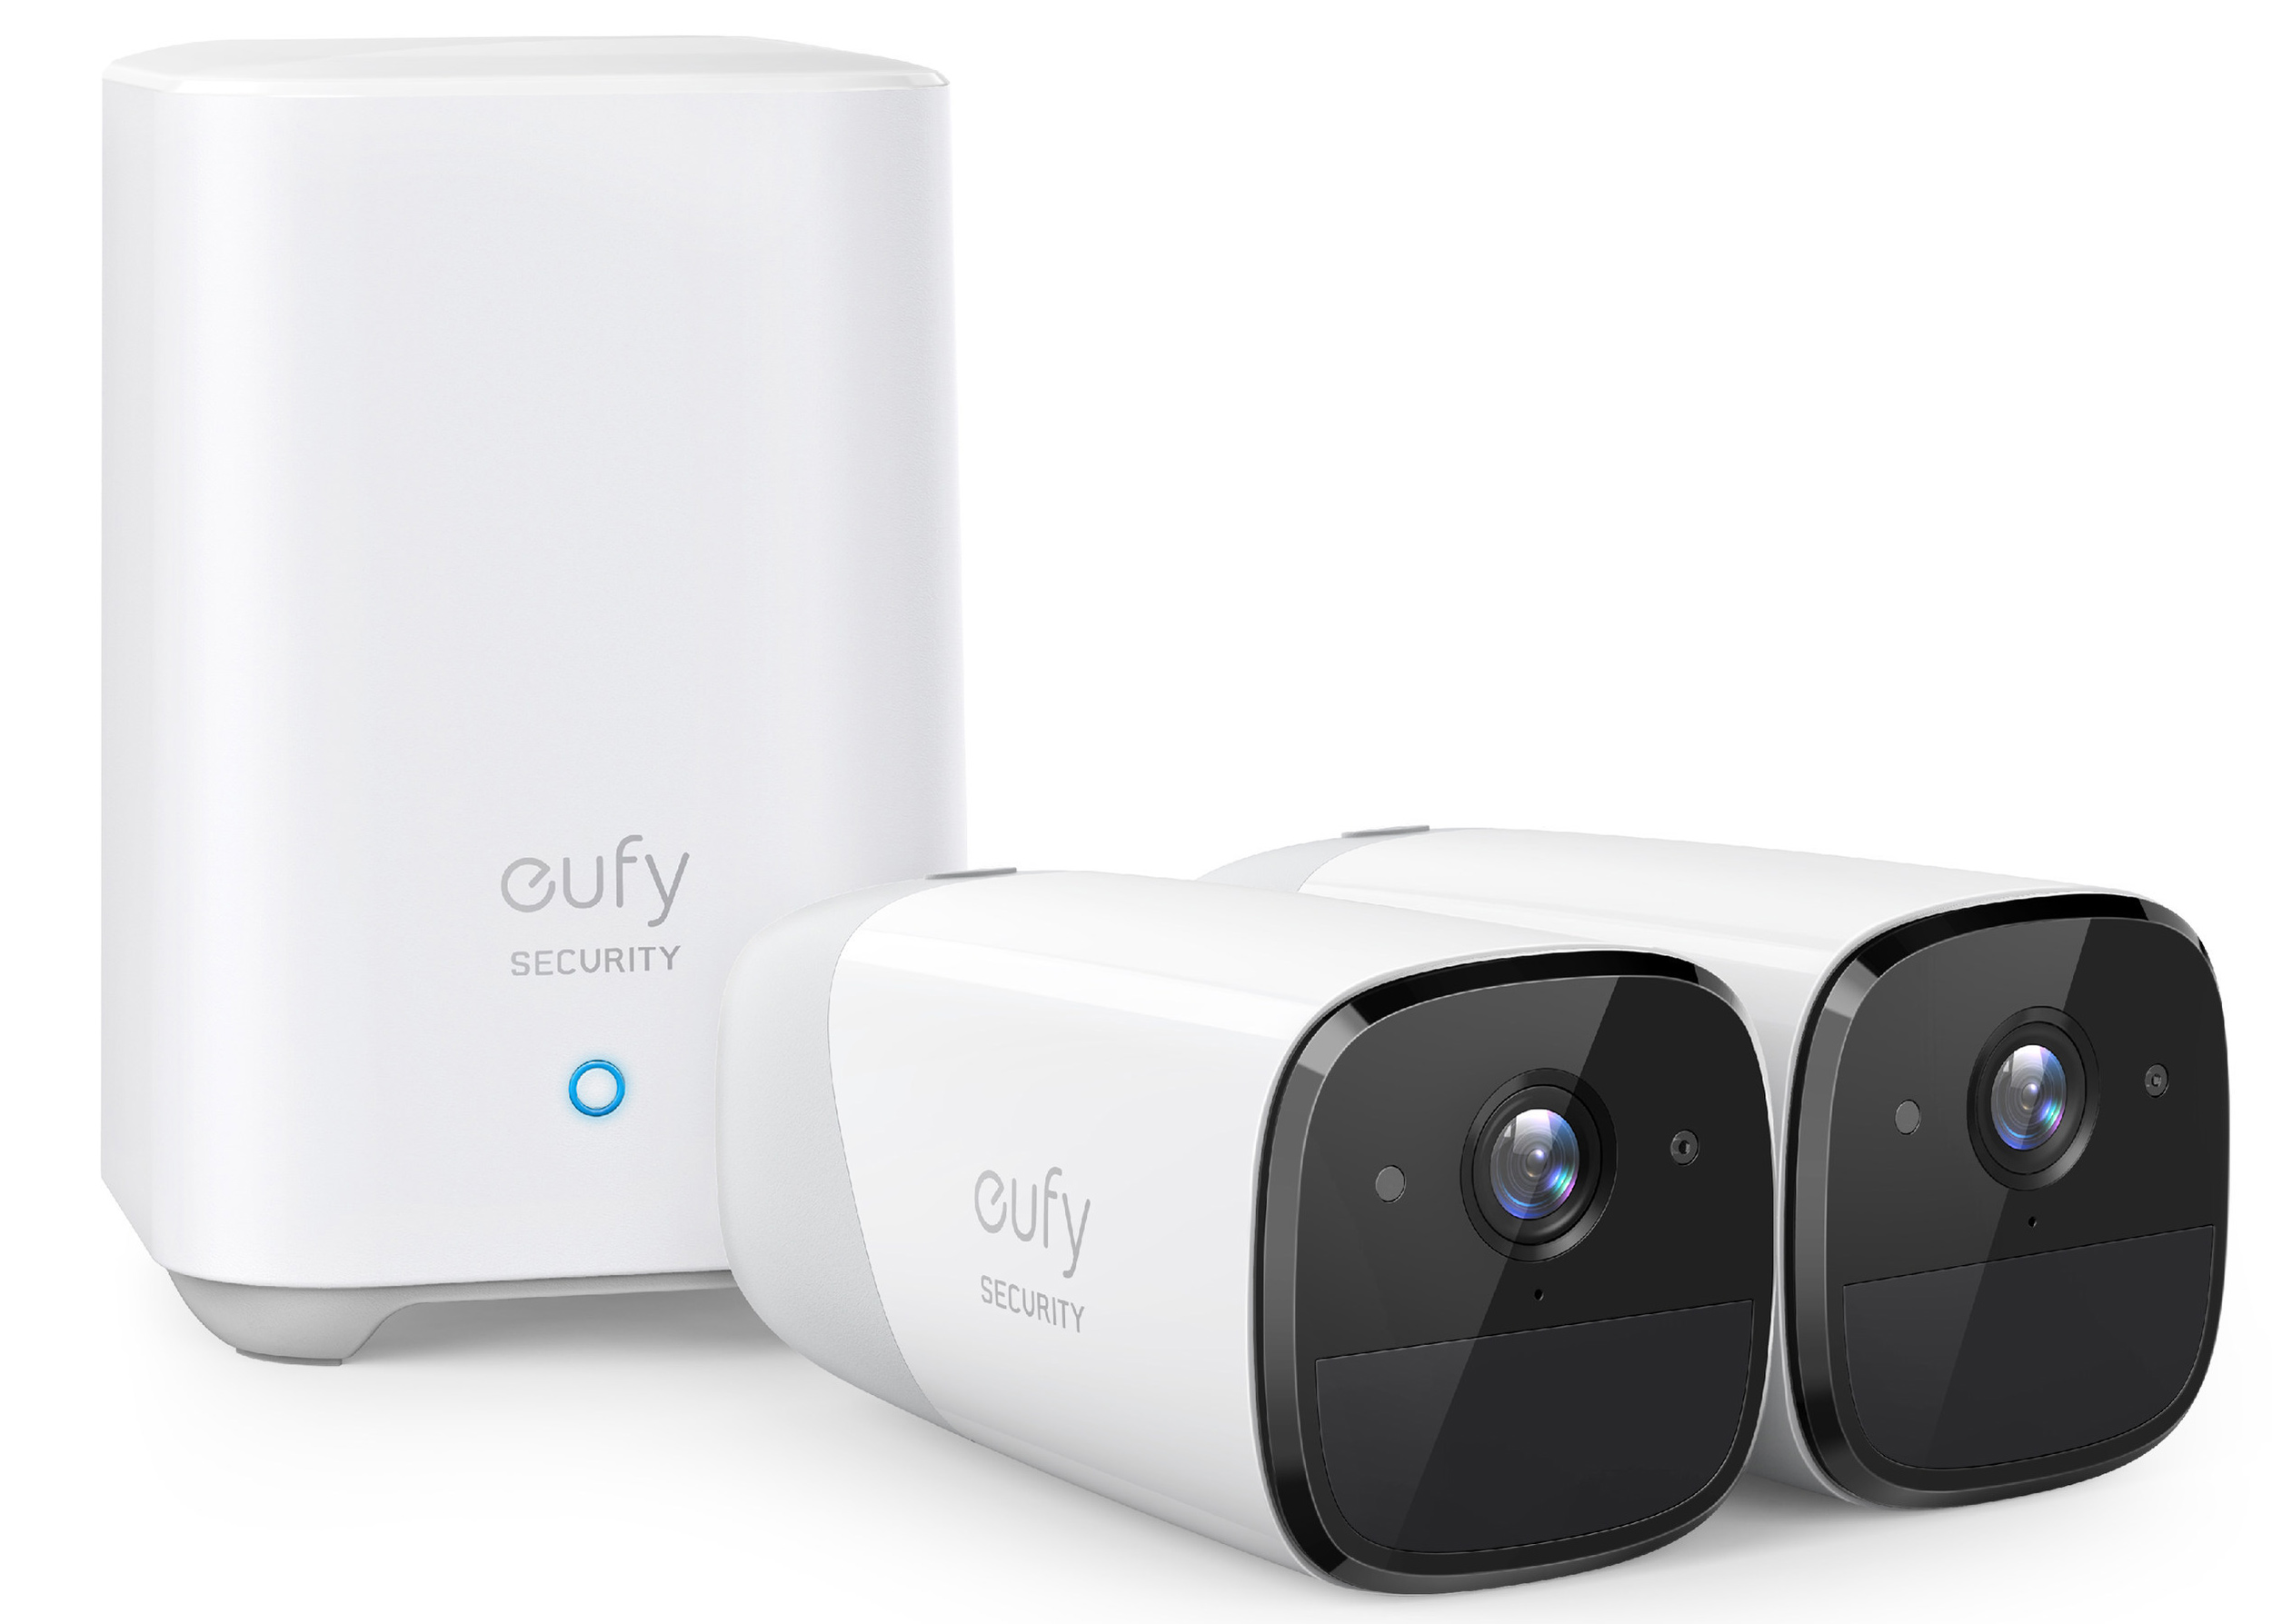 Anker Launches New eufyCam 2 Pro 2K Camera With HomeKit Secure Video Support - MacRumors